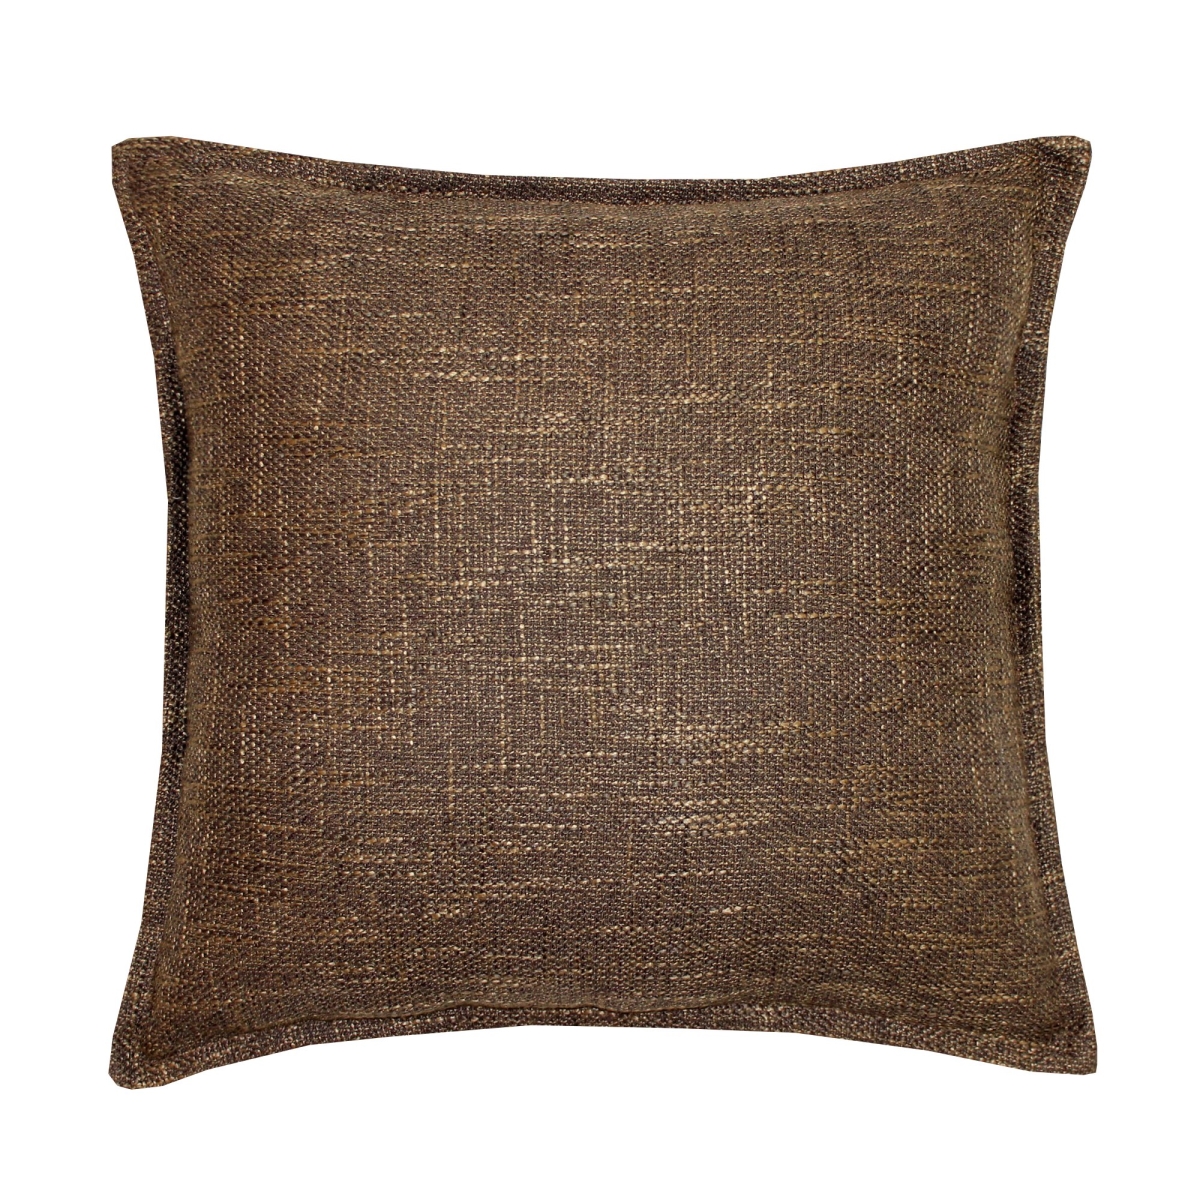 18 X 18 In. Burlap Decorative Cushion, Brown - 100 Percent Duck Feather